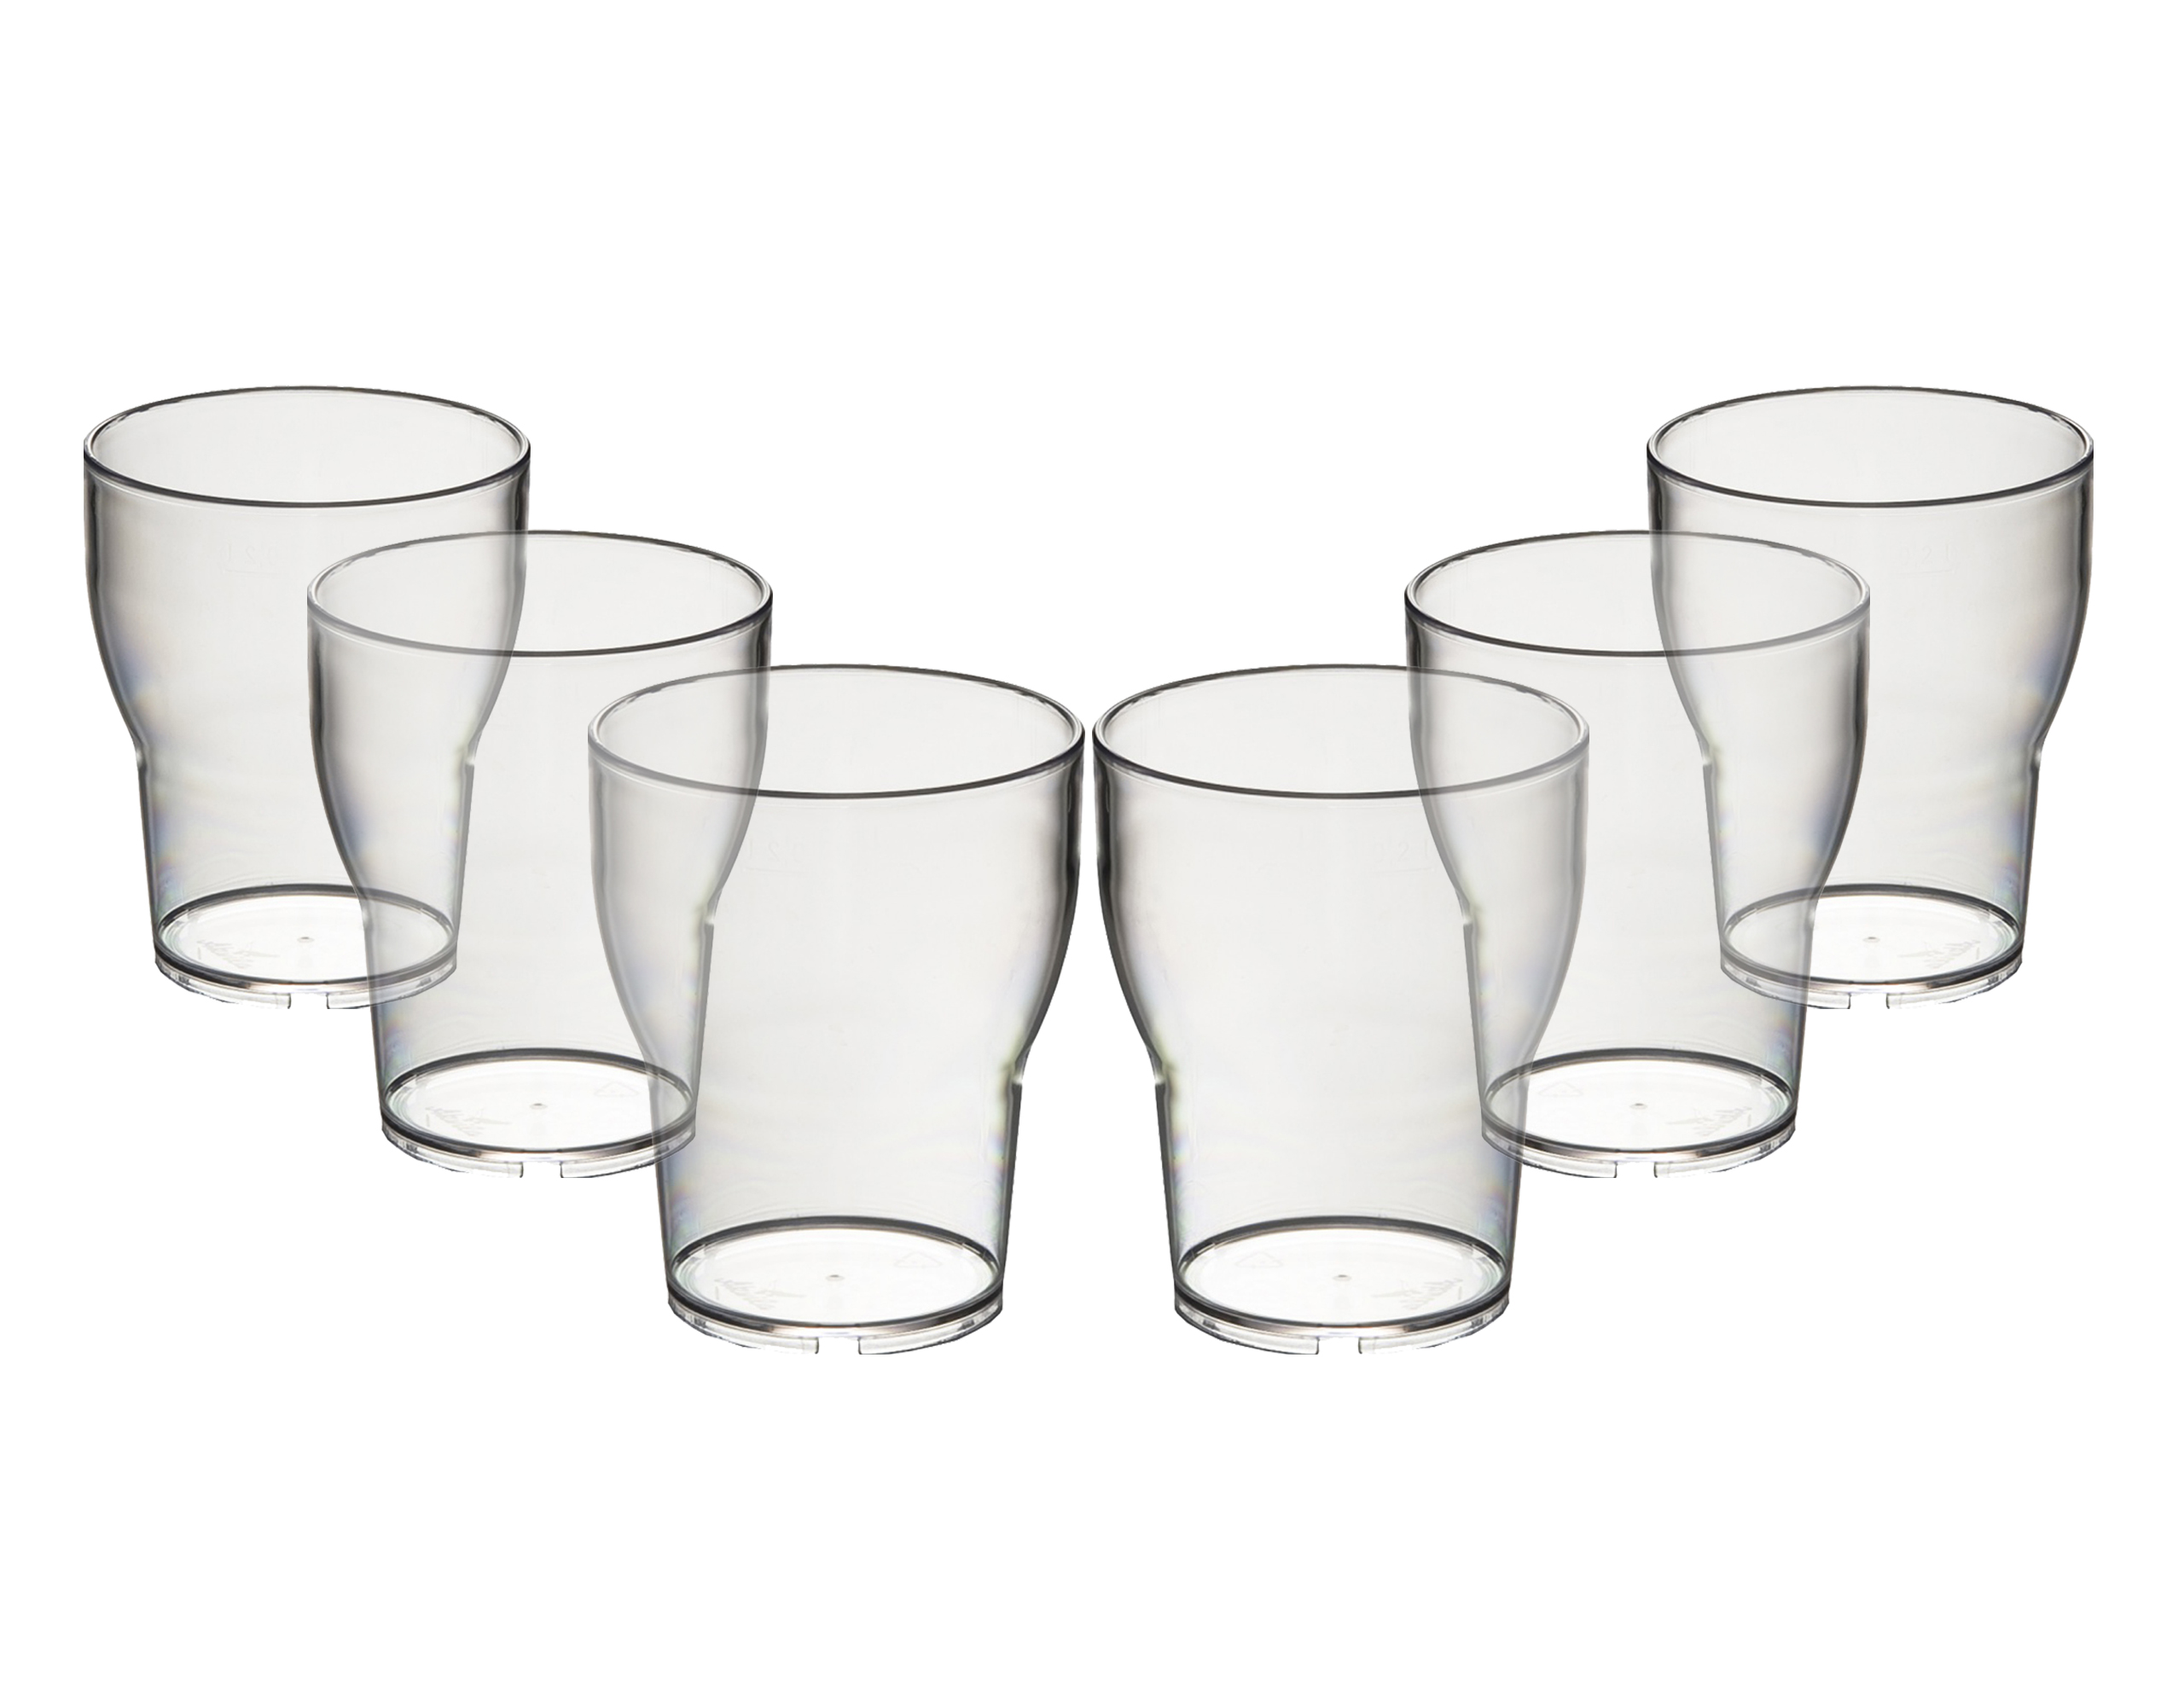 Set of Roltex Unbreakable Reusable Polycarbonate Plastic STACKING Wine Glasses